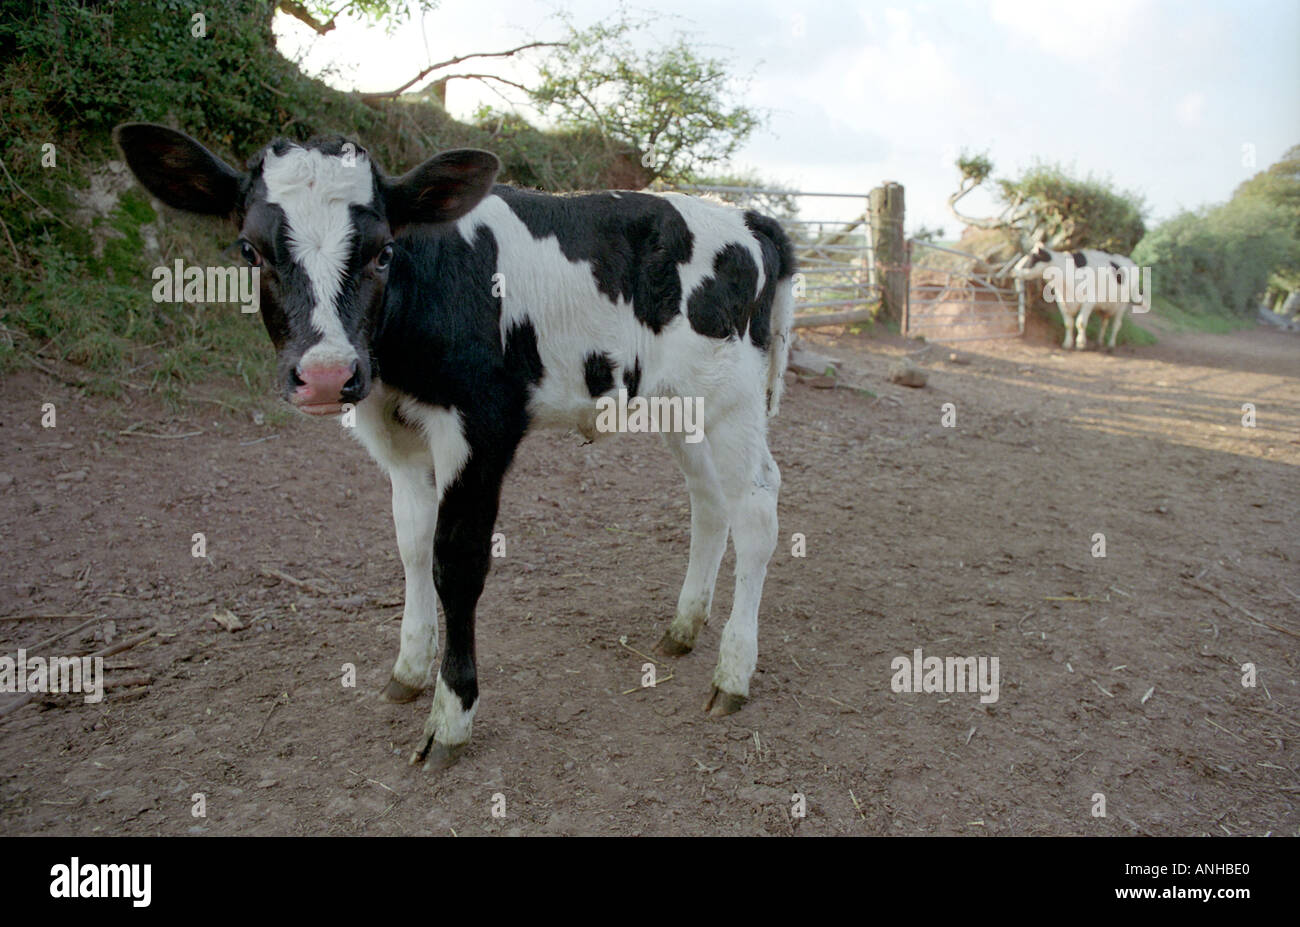 A curious calf under the watchful eye of its protective mother in the background Stock Photo